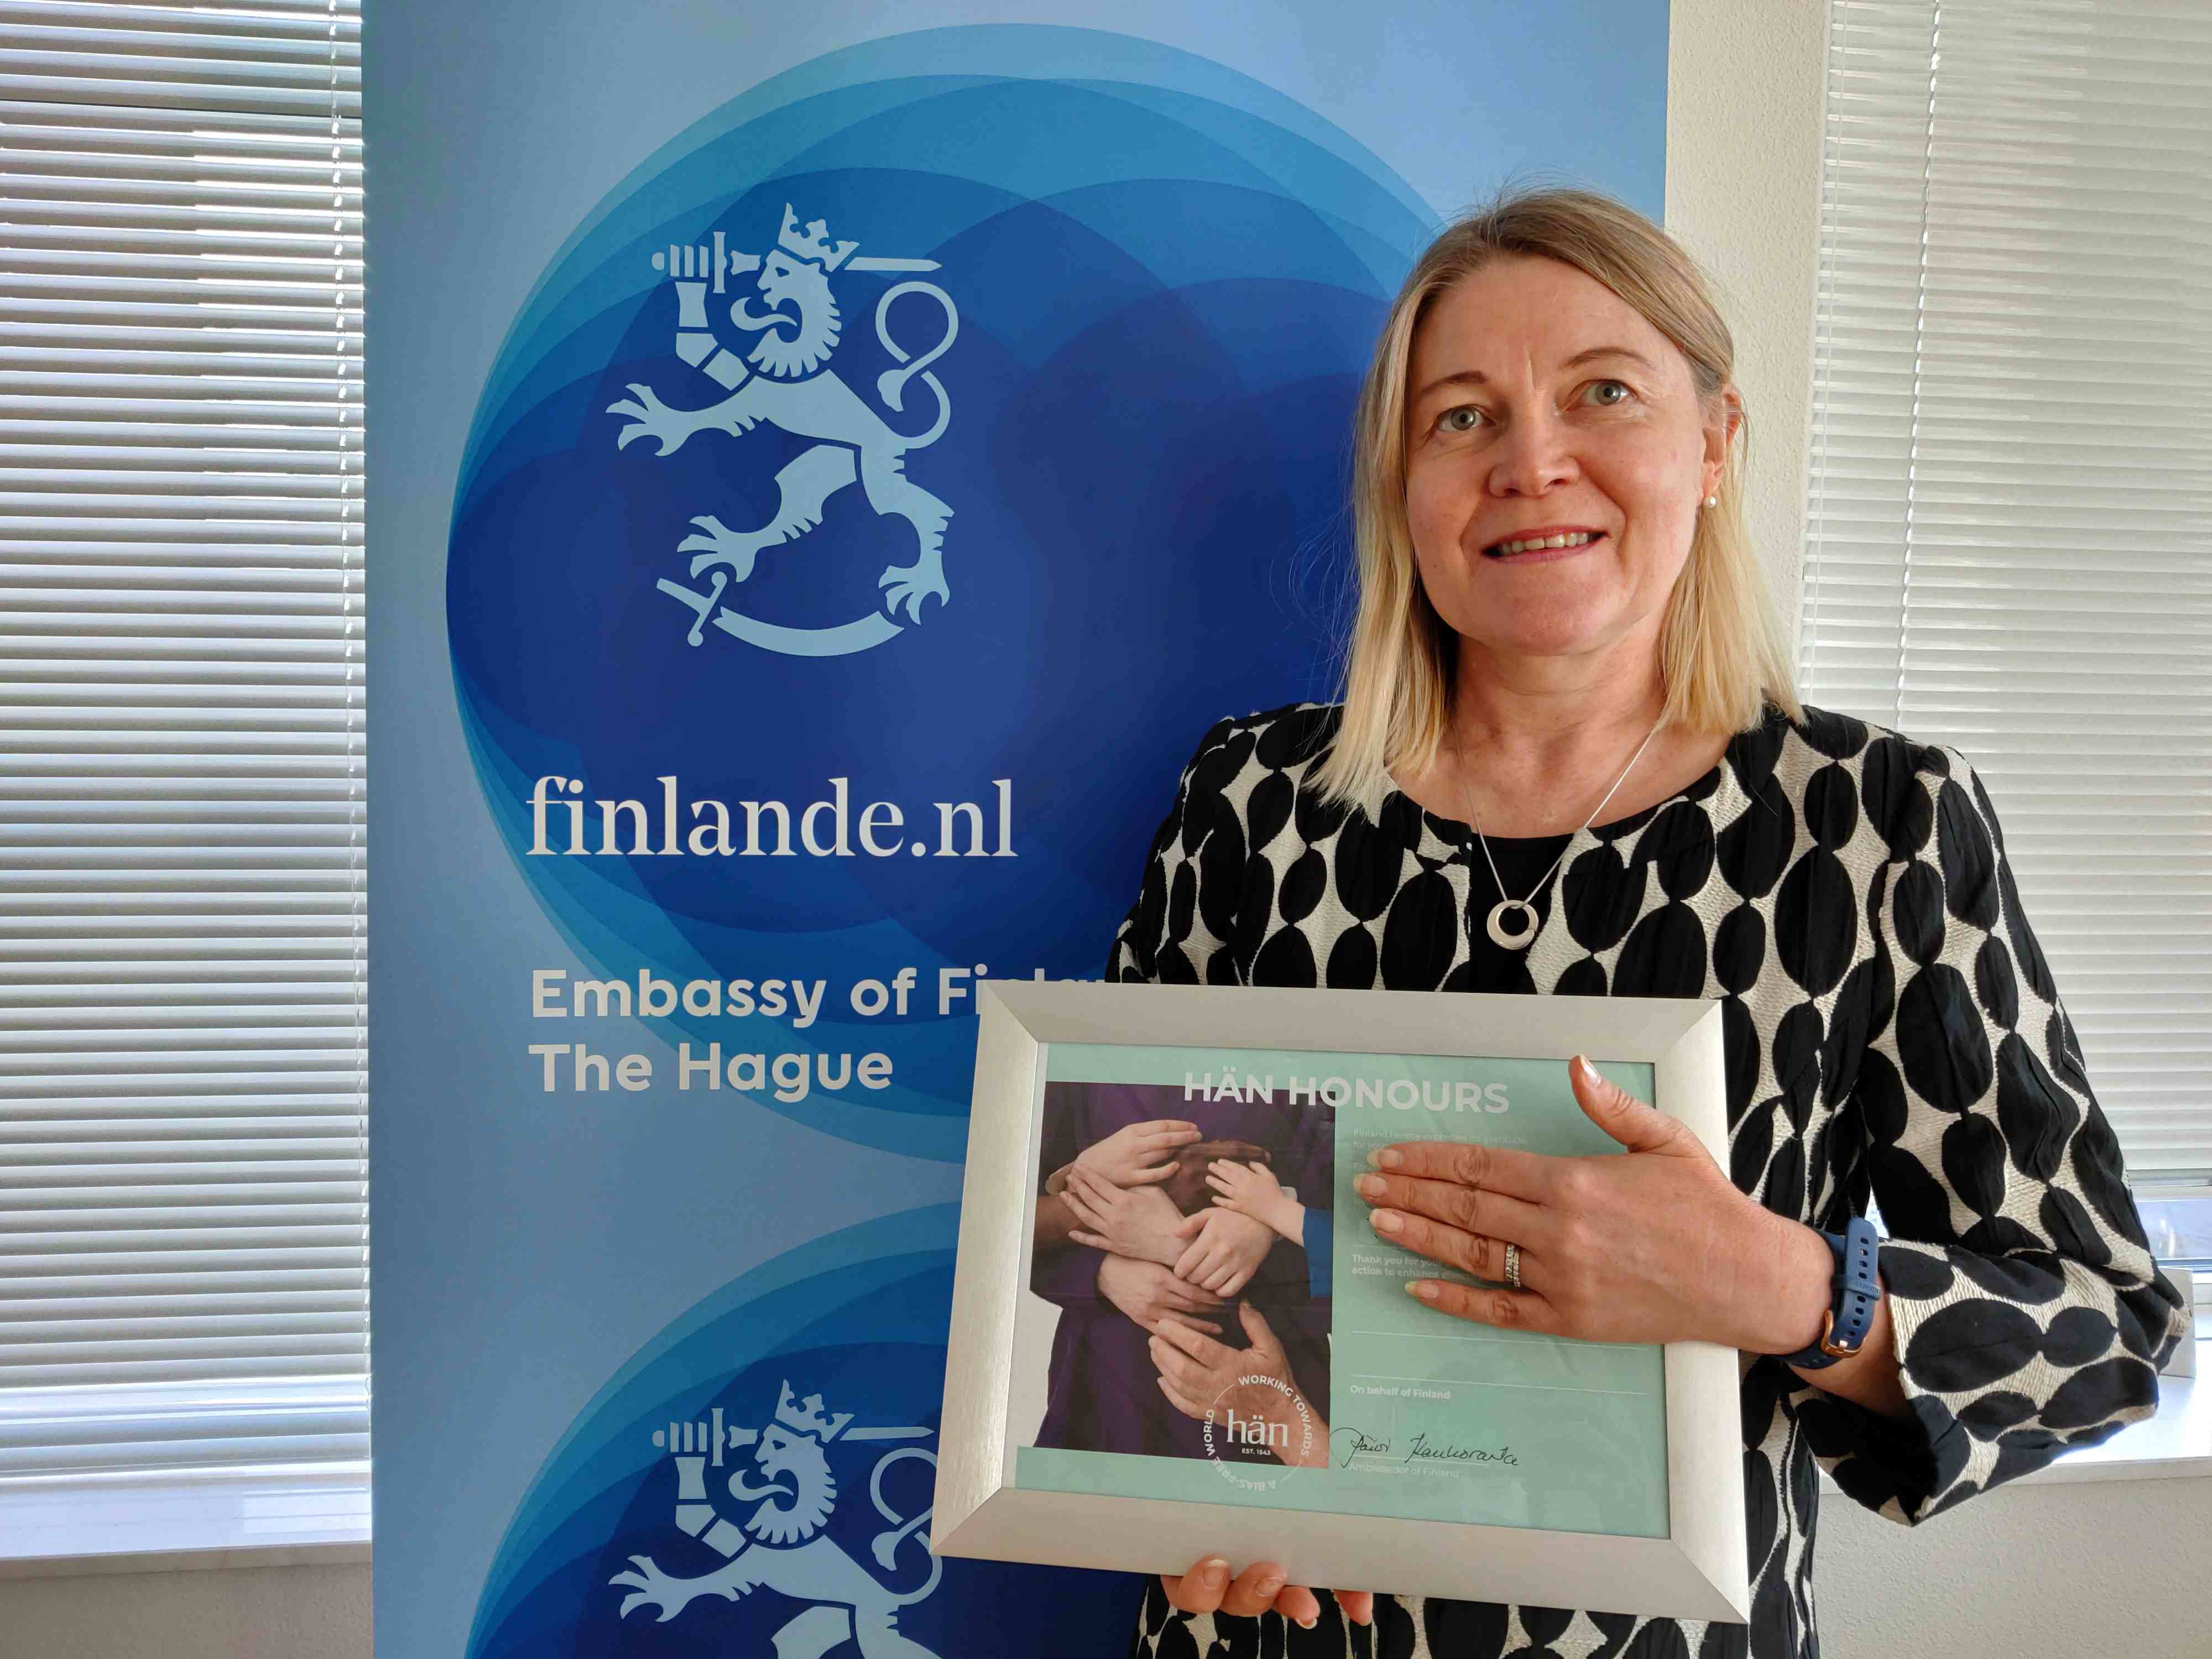 Ambassador Päivi Kaukoranta with the recognition and a roll up of the Embassy of Finland in the Hague